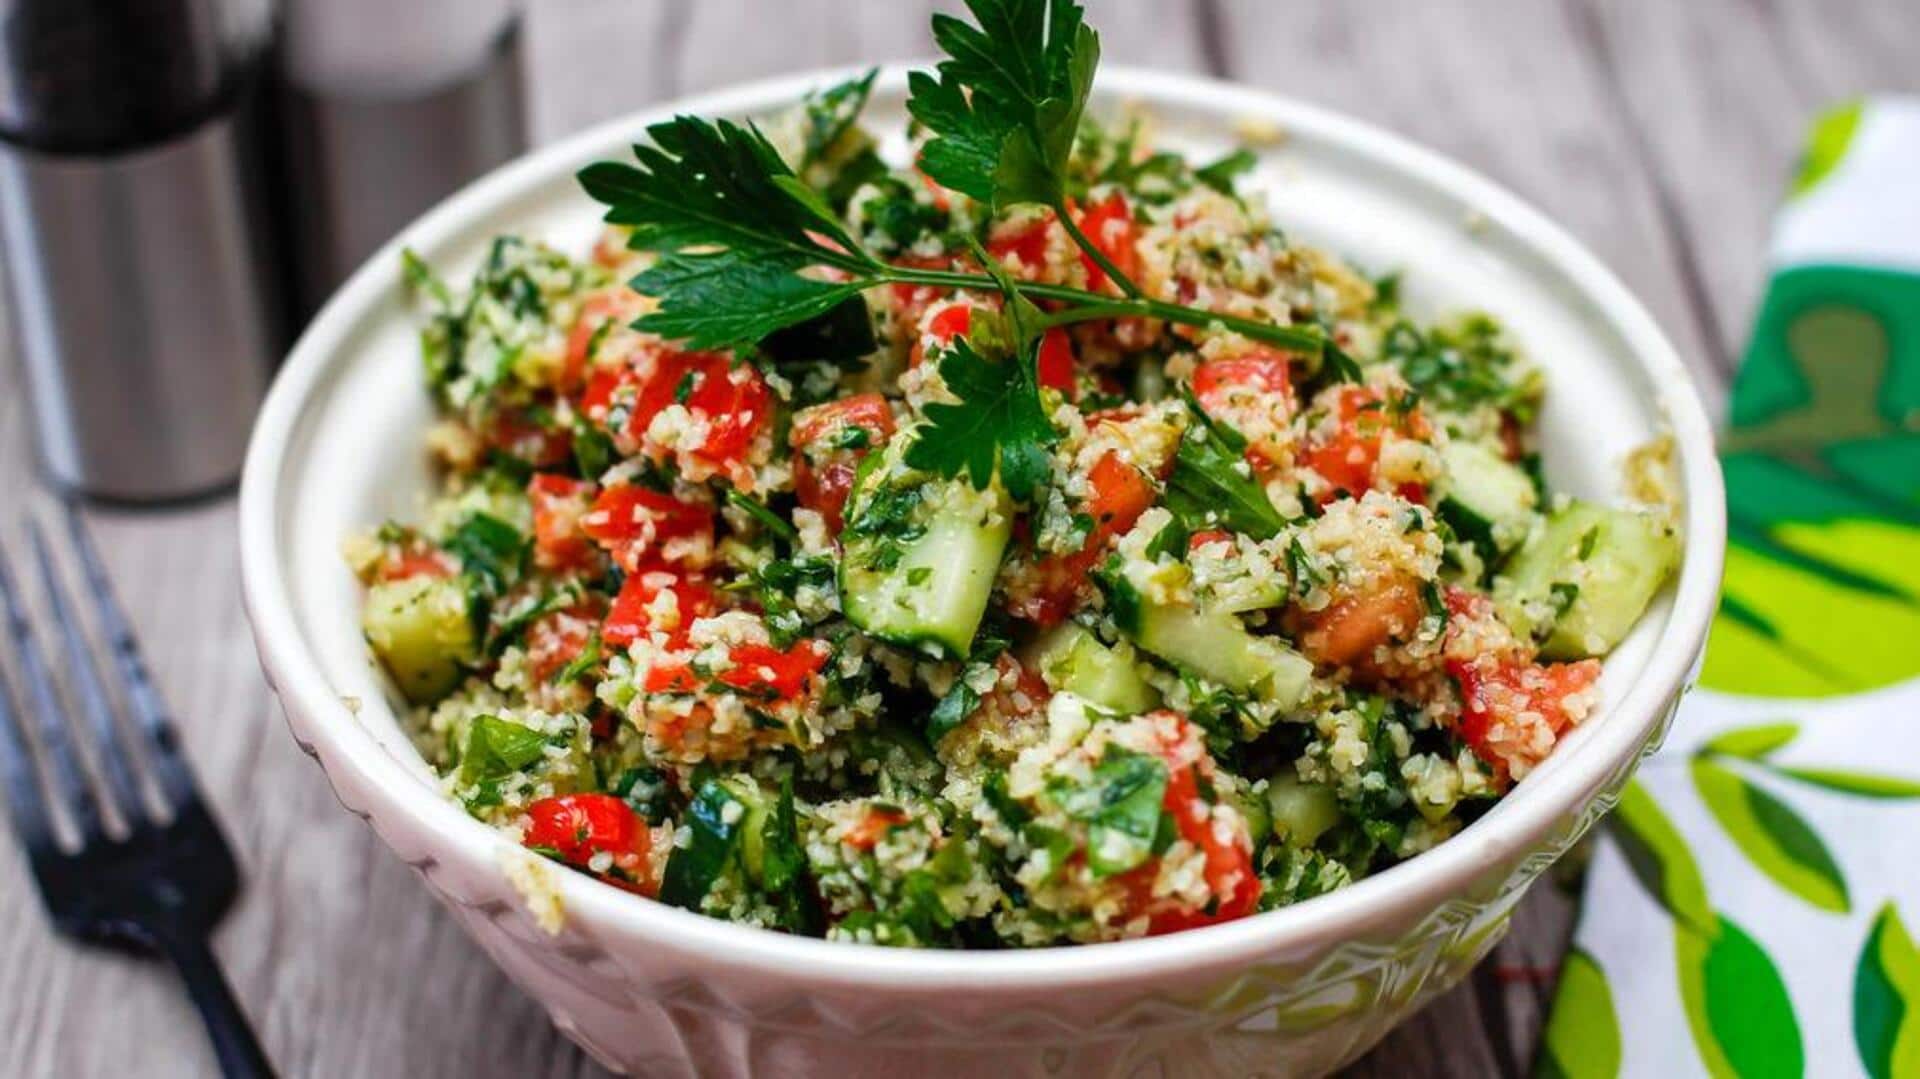 Recipe: This quinoa tabbouleh is perfect for health freaks